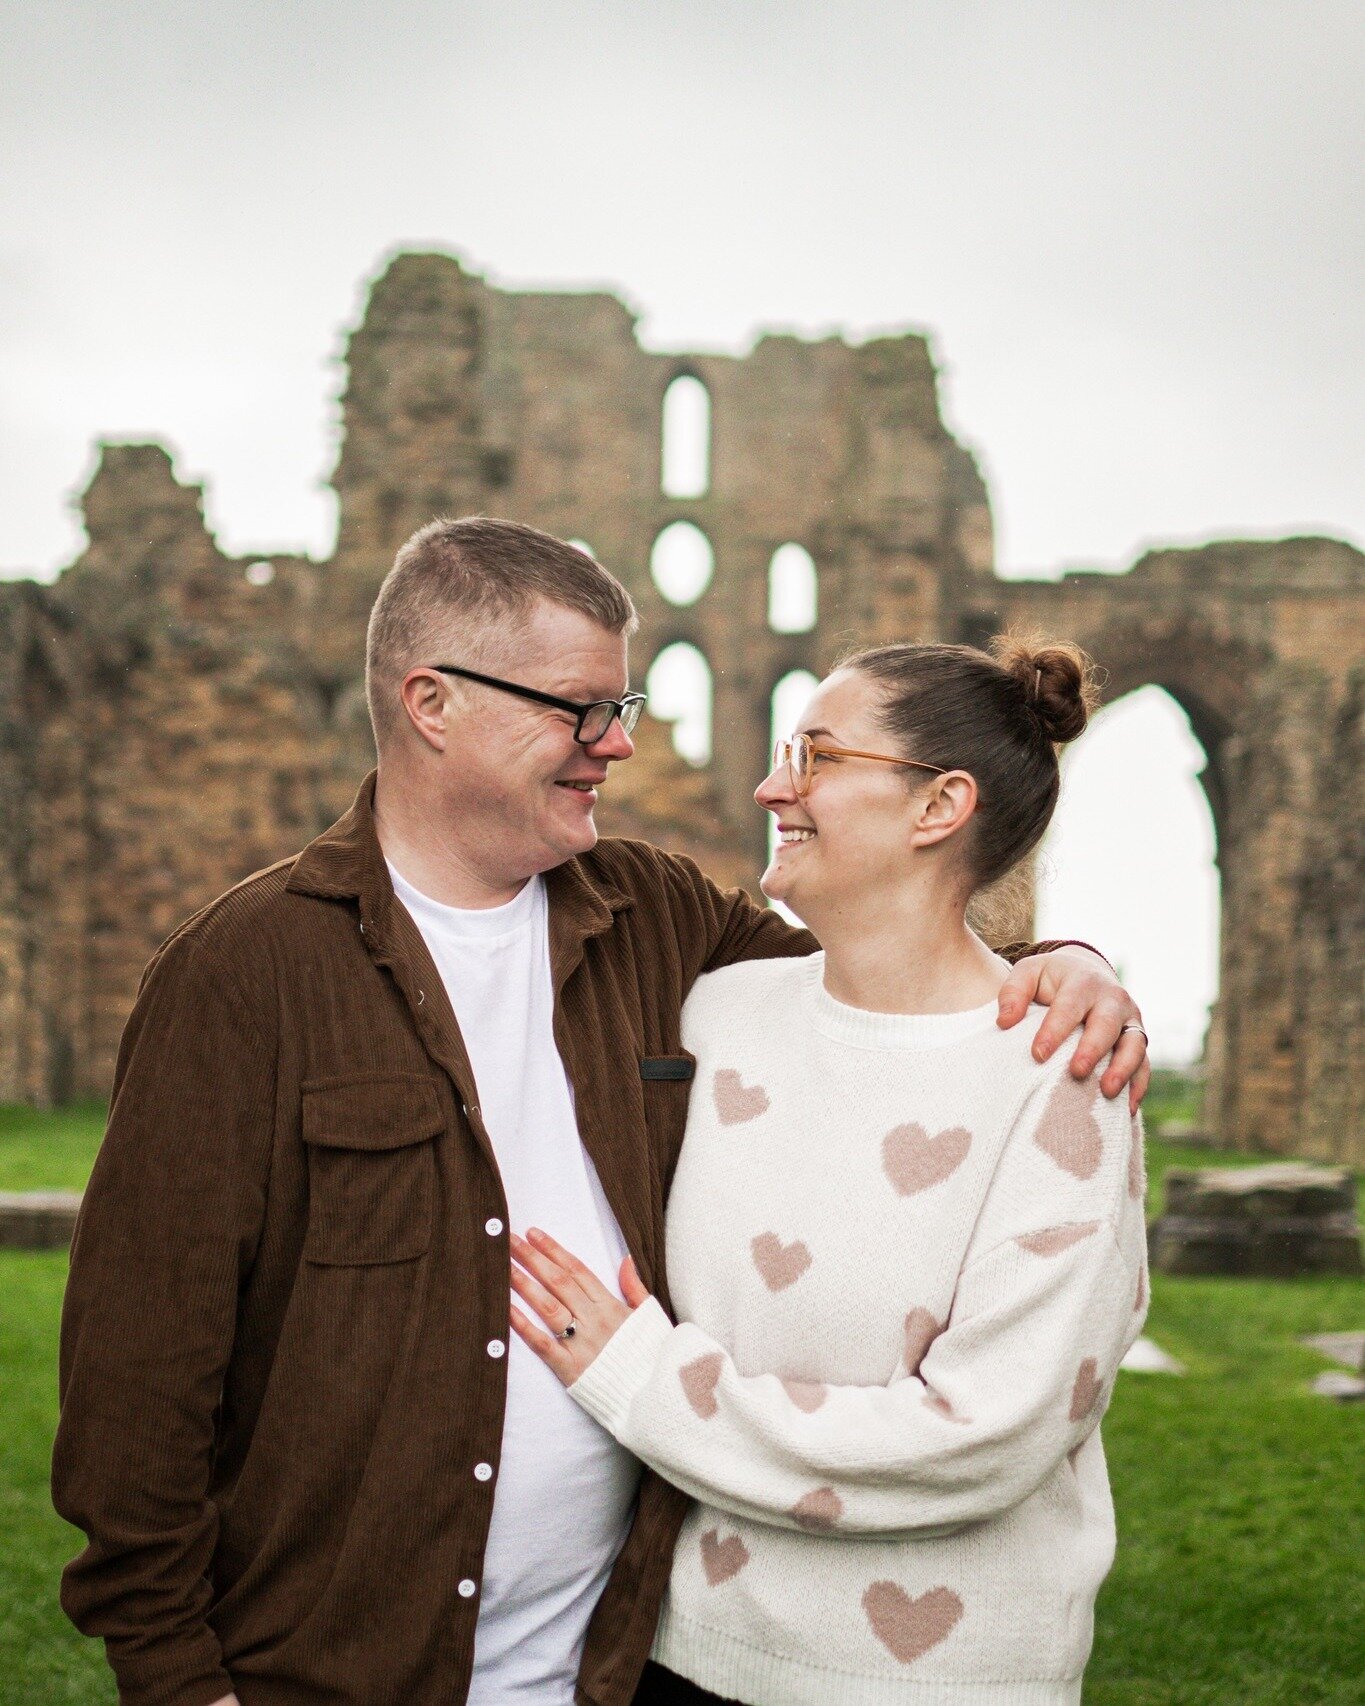 Nowt like a pre-wedding shoot to get used to being in front of the camera before the big day!

We recently ventured out on a wet, wild and windy weekend to Tynemouth Priory with the lovely Toni &amp; Chris (and their two kids!) for a little pre-weddi